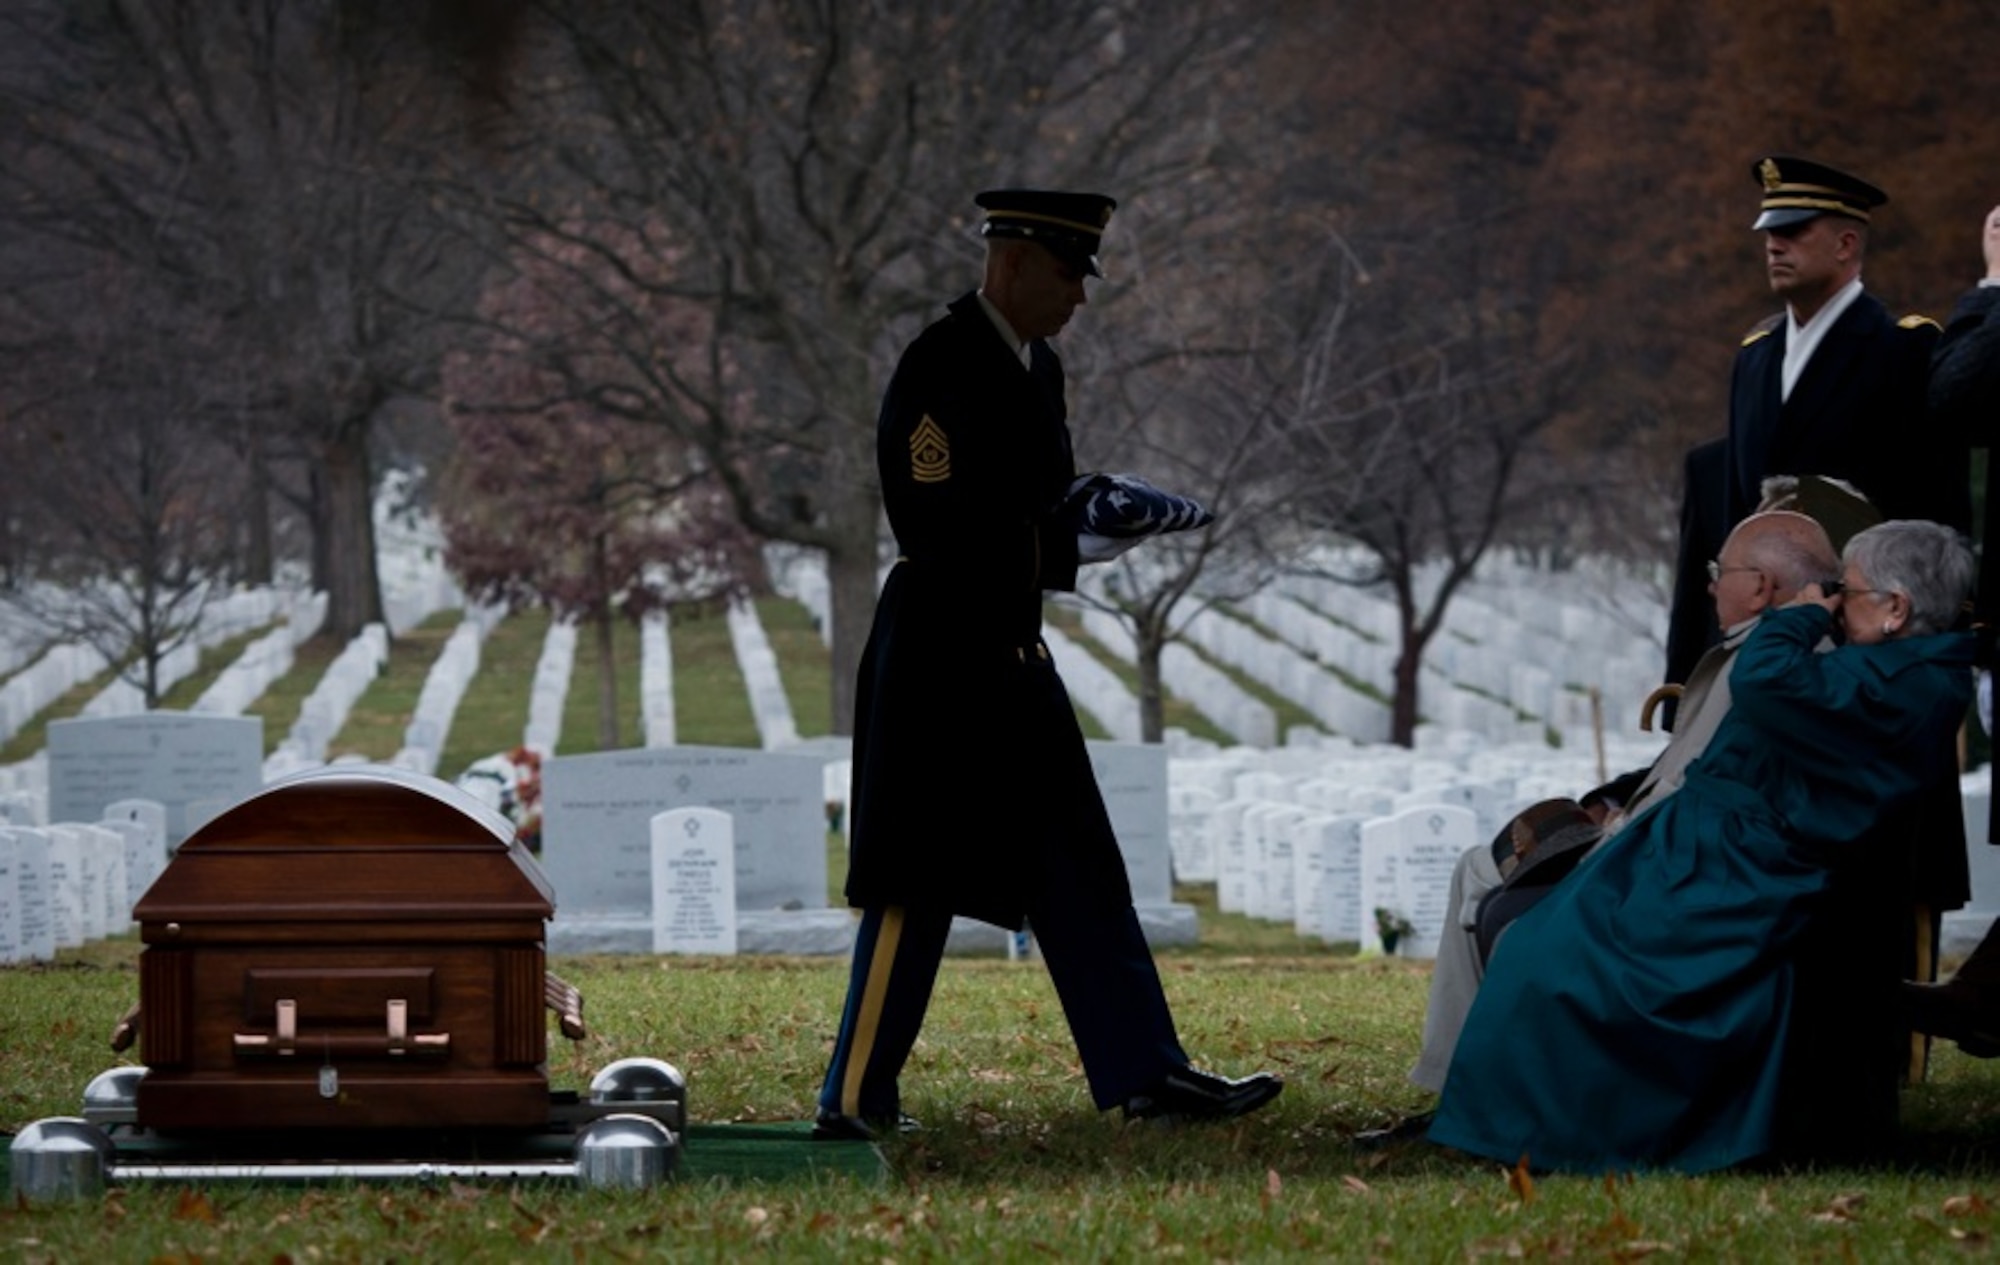 Command Sgt. Maj. Michael Callaghan-McCann prepares to present the flag to a family member of Army Air Forces Sgt. Charles A. Gardner Dec. 4, 2014, in Arlington National Cemetery. Gardner, along with 11 of his fellow crew members, went missing on April 10, 1944, after his B-24D Liberator aircraft was shot down over New Guinea. Callaghan-McCann is with the 1st Battalion, 3rd Infantry. (U.S. Air Force photo/Staff Sgt. Andrew Lee)